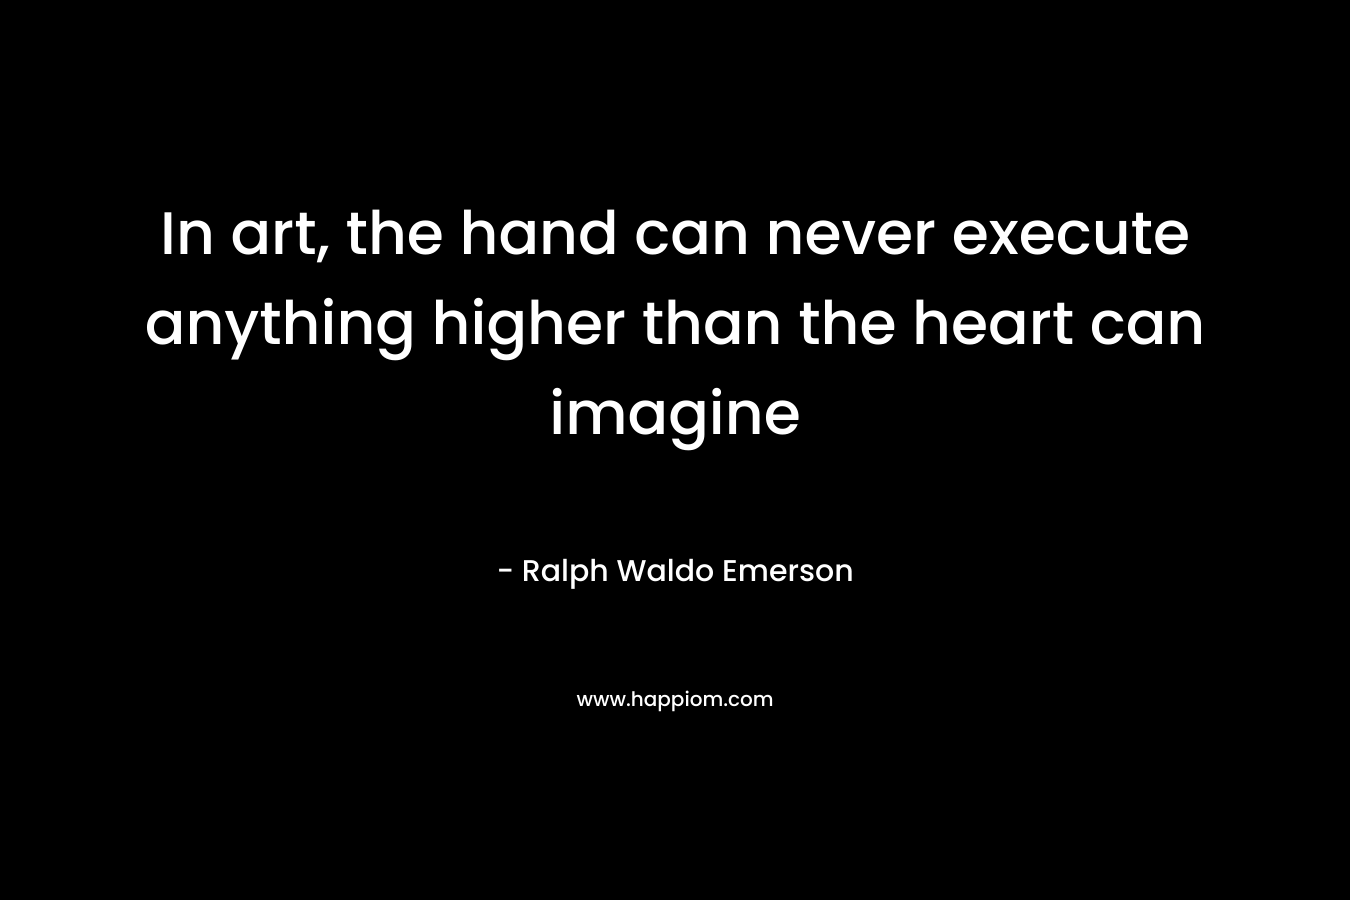 In art, the hand can never execute anything higher than the heart can imagine